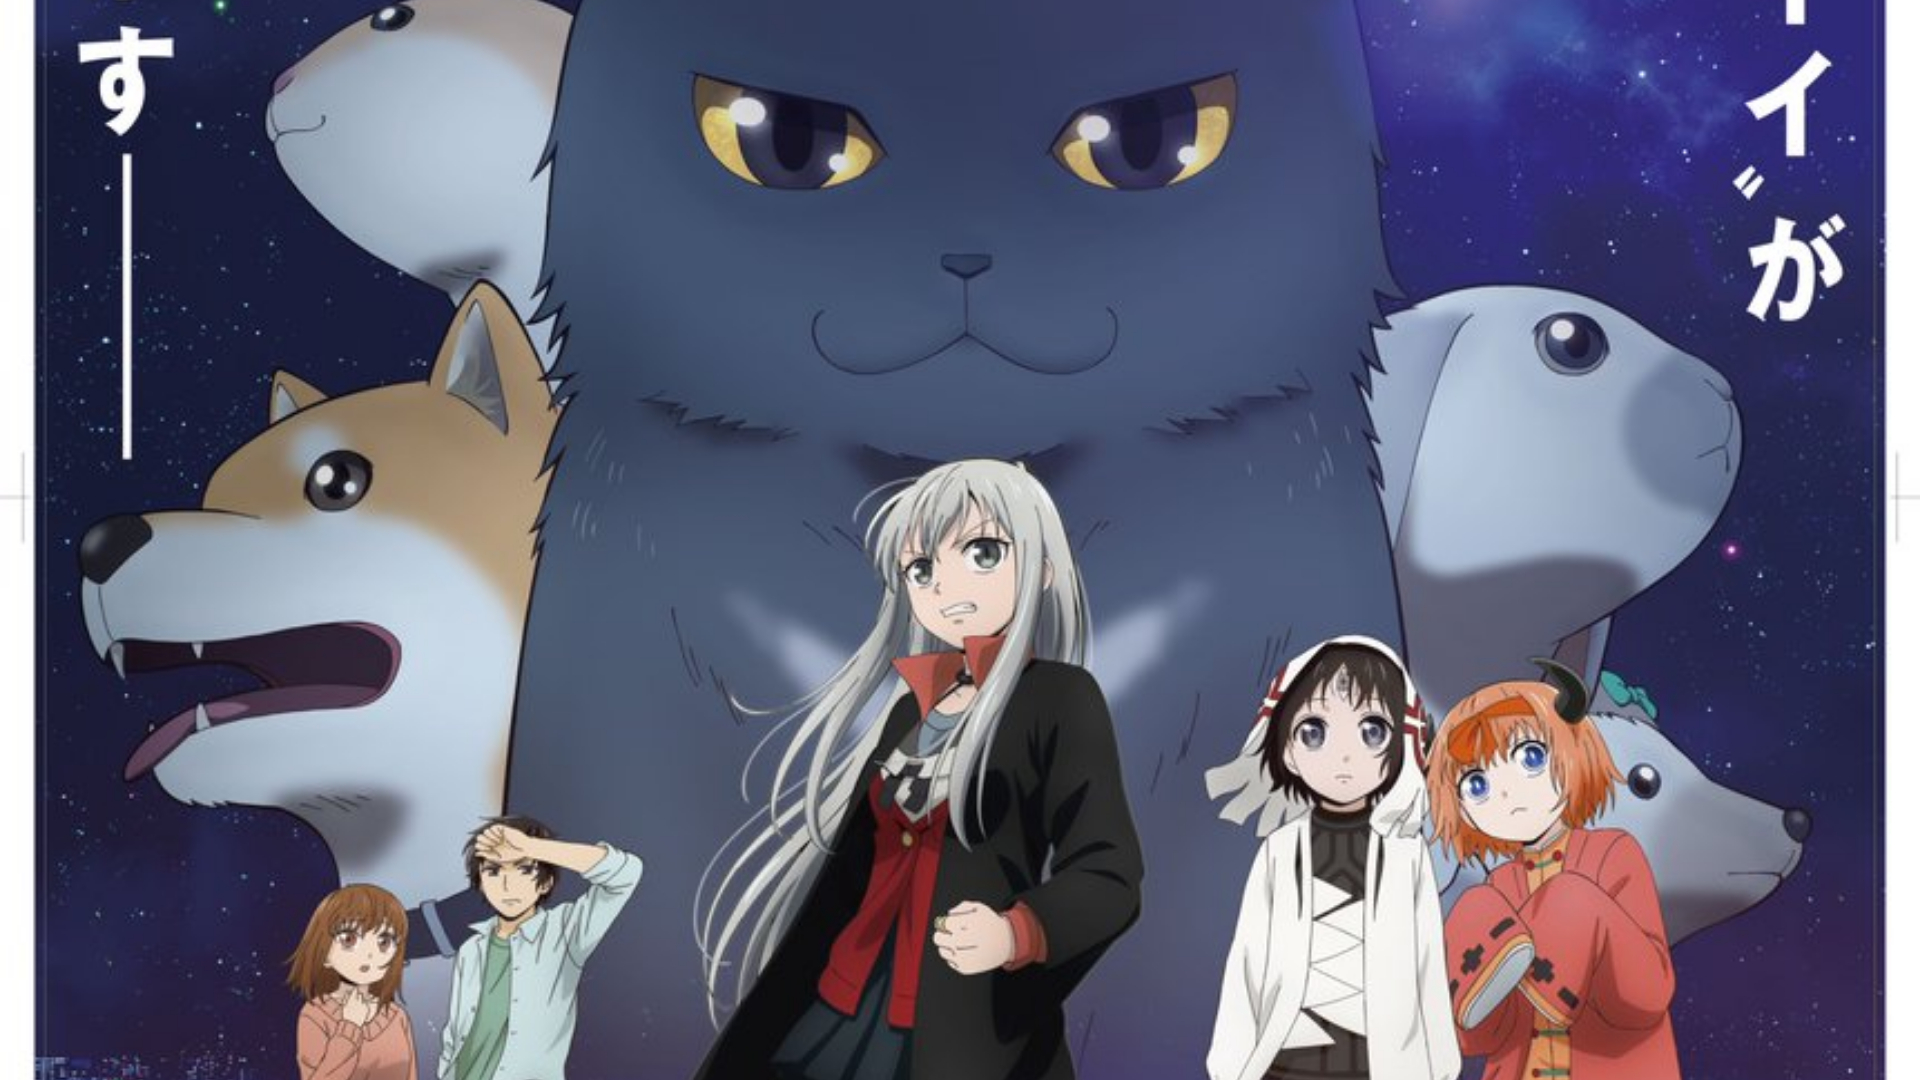 Giant Beasts of Ars Original TV Anime Announced for January 2023